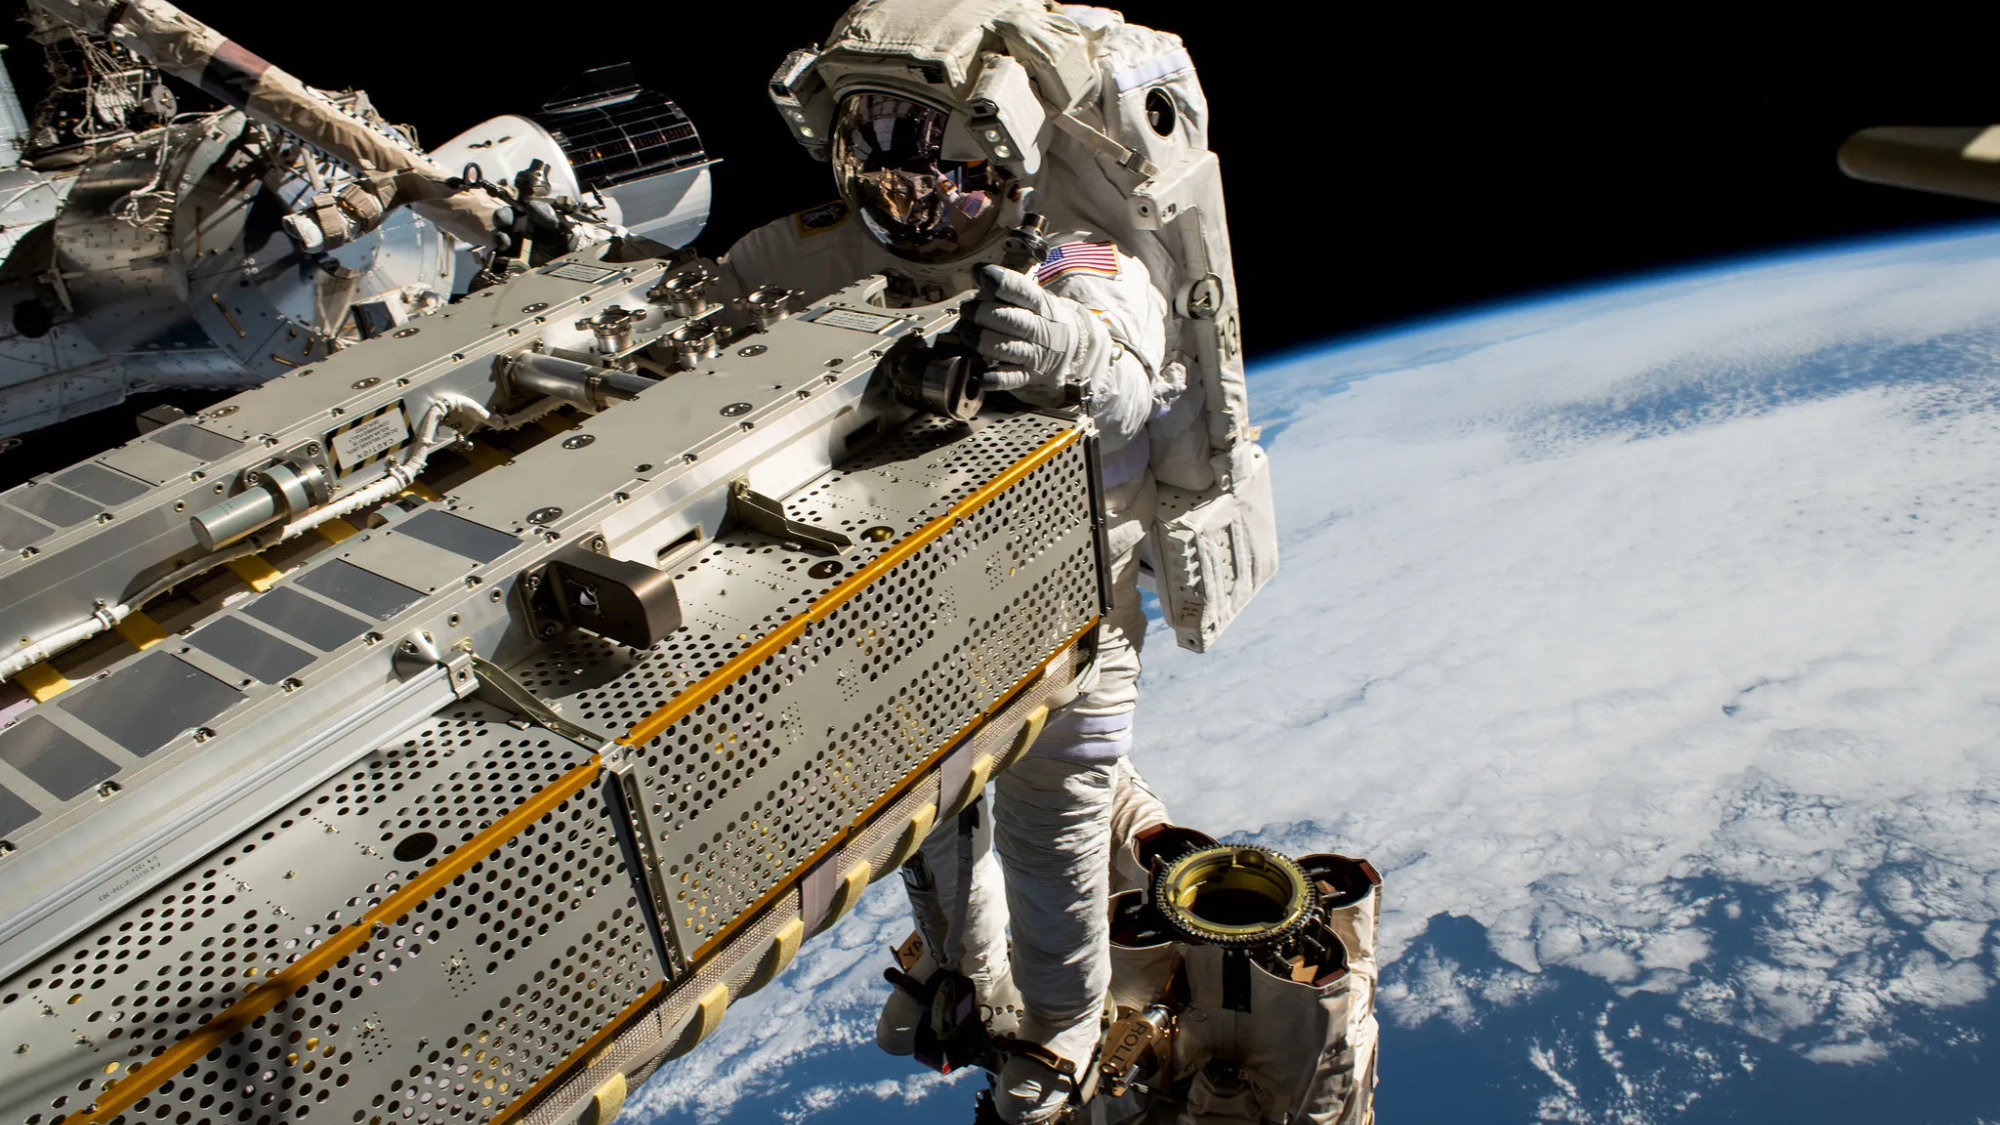 Watch NASA astronauts collect microbe samples during ISS spacewalk on June 13 Space